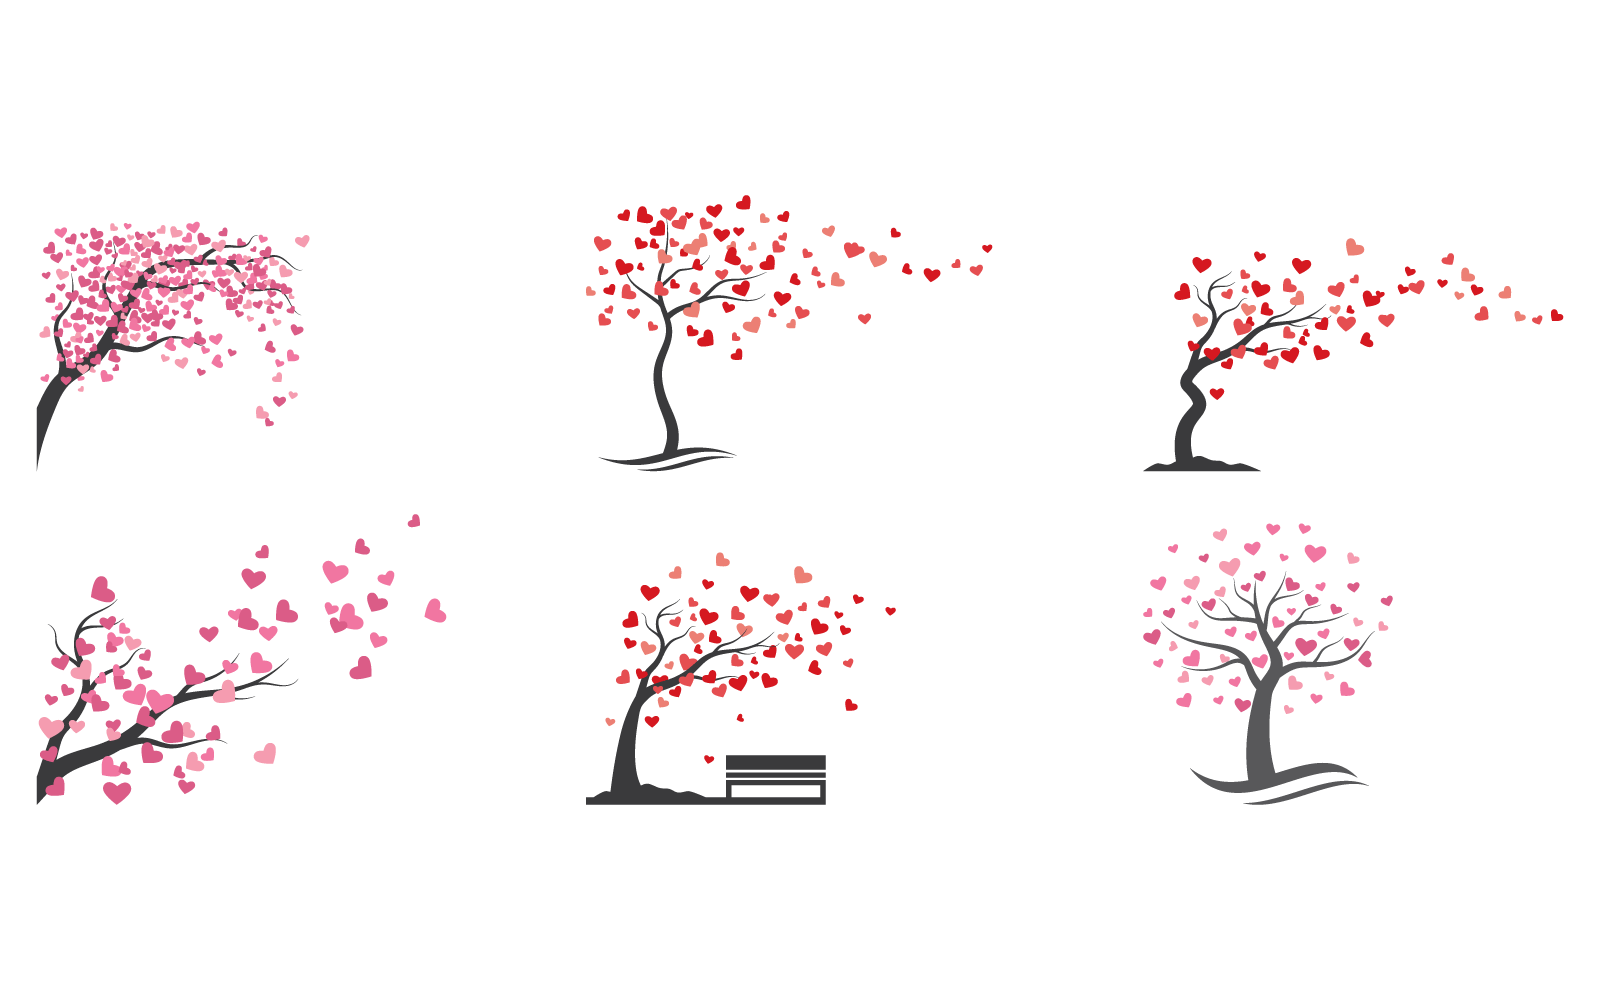 Tree with heart leaves vector design